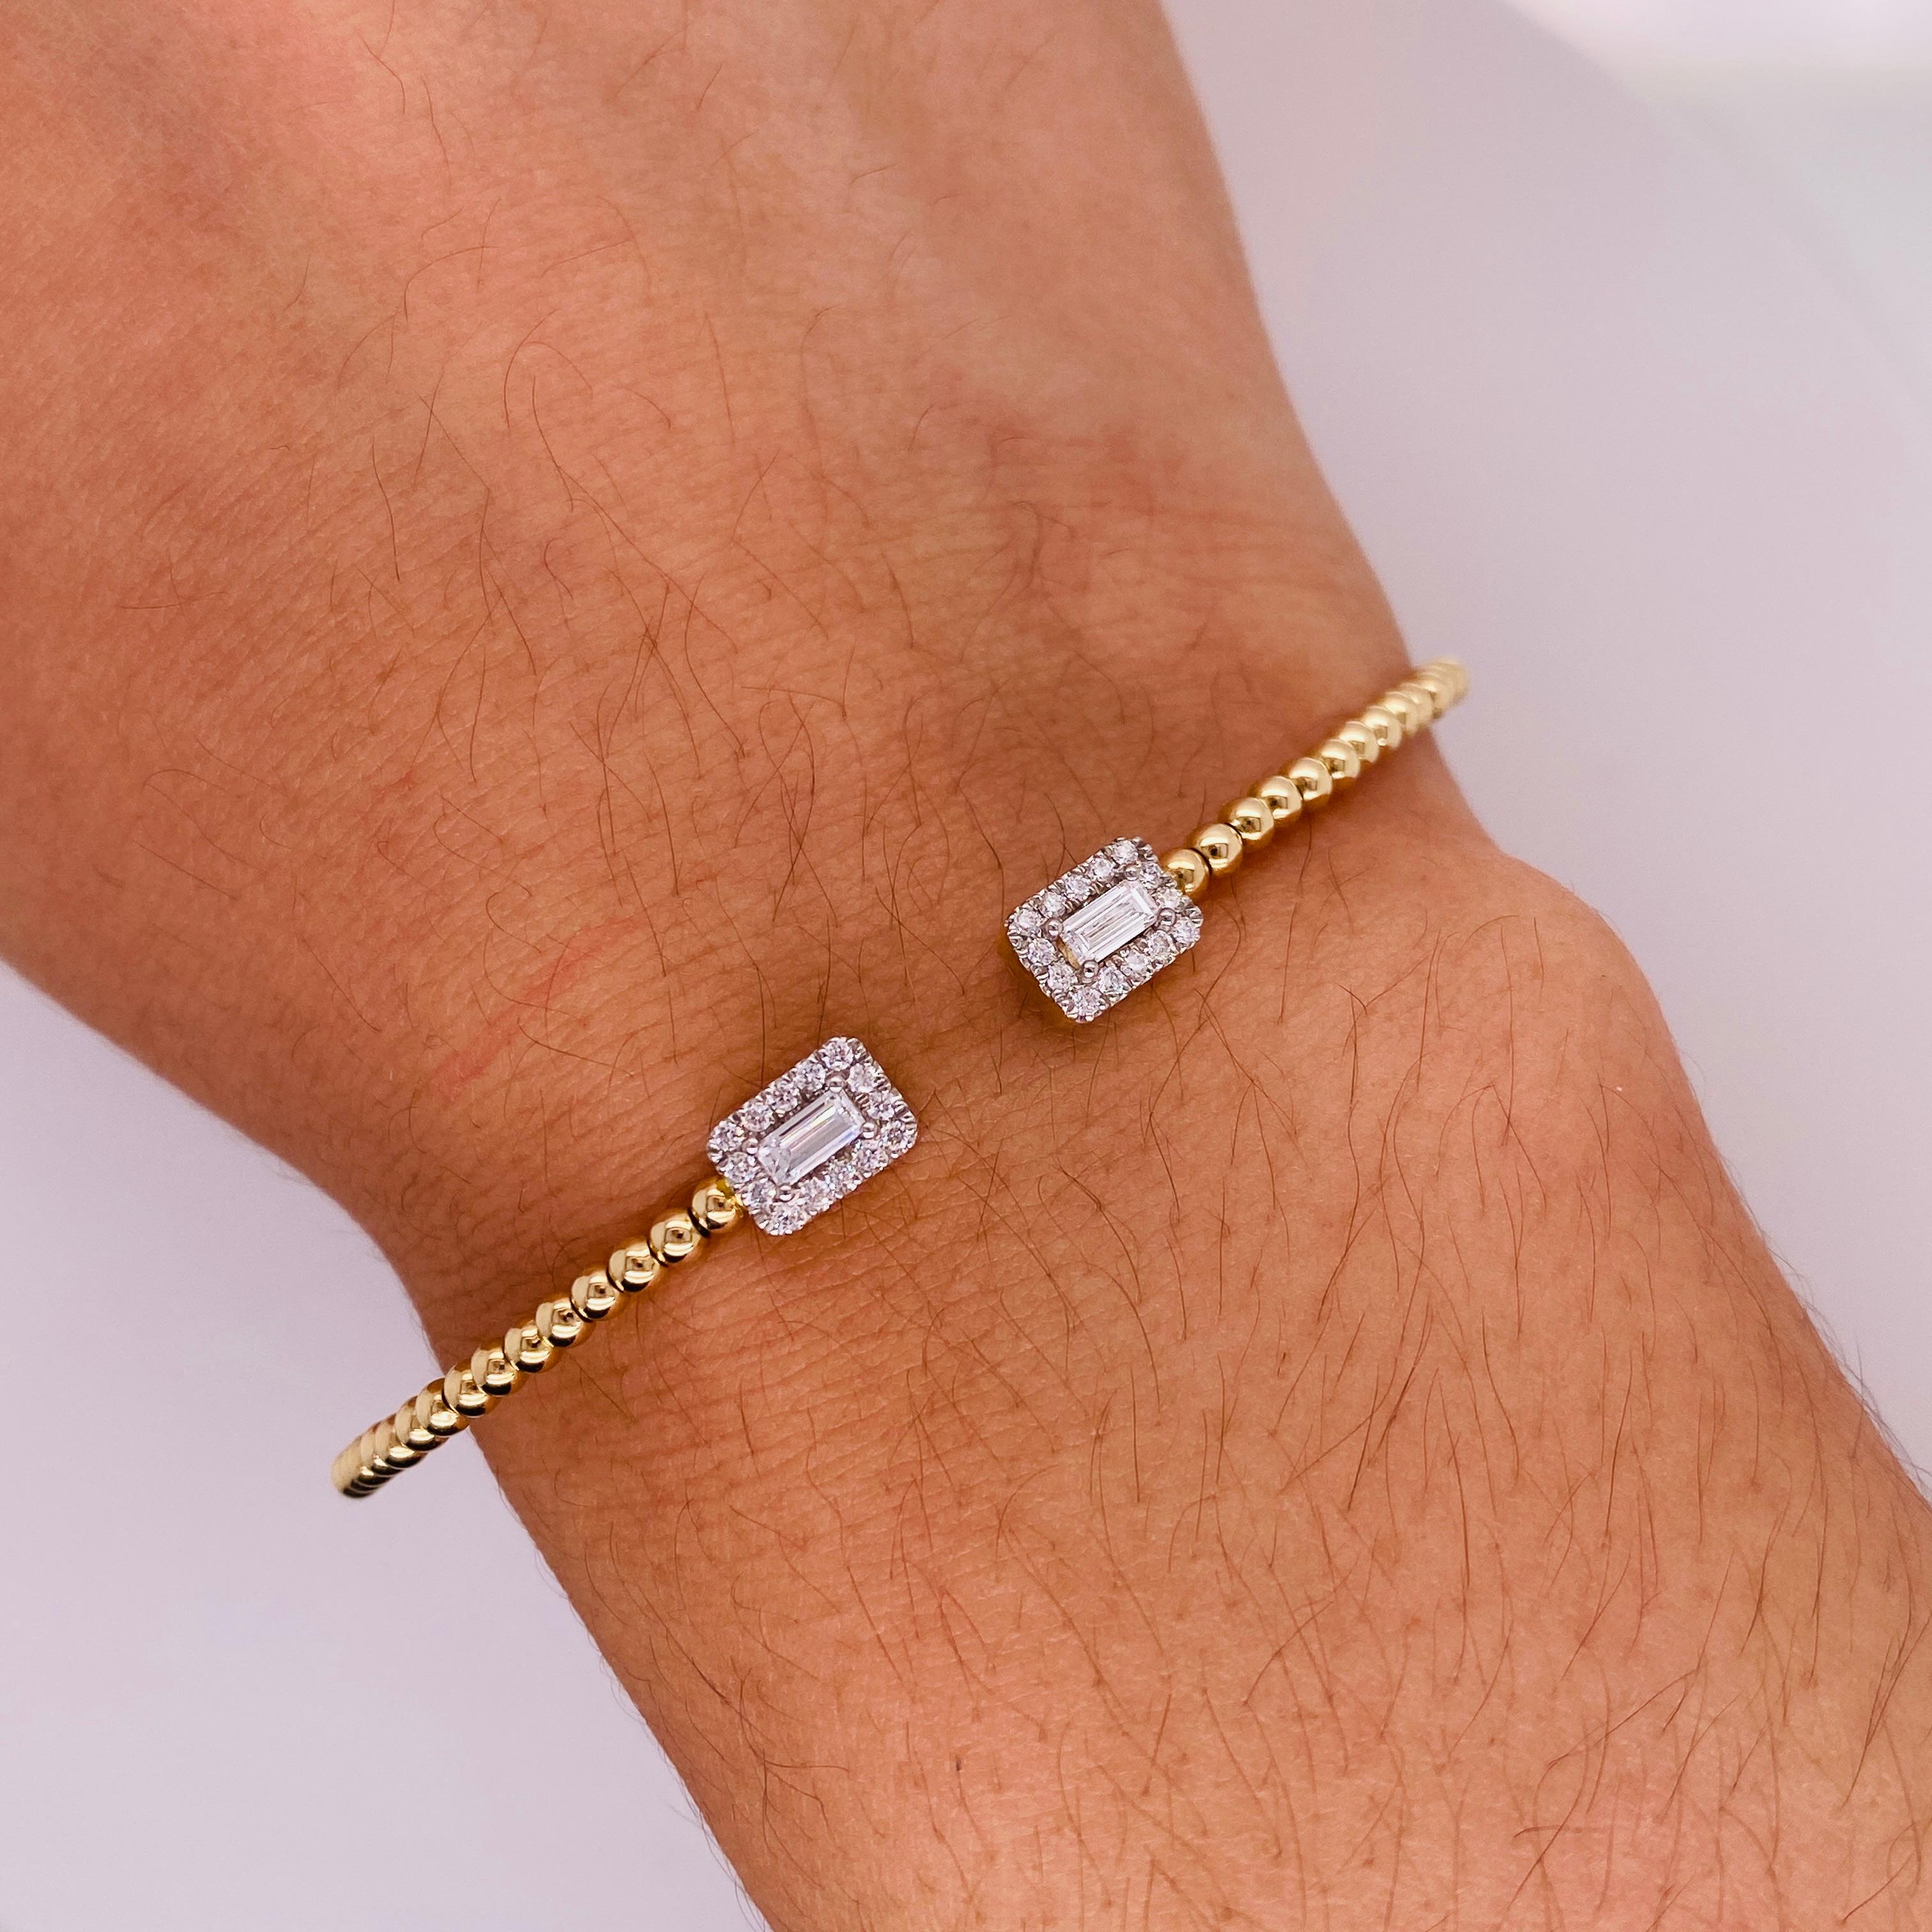 Beautifully slender and comfortable, this low-profile bangle bracelet is a winner on your wrist! You can wear it alone or stacked, perfect for any and every day wear! The bracelet  is designed to flex easily open to slide on your wrist and then